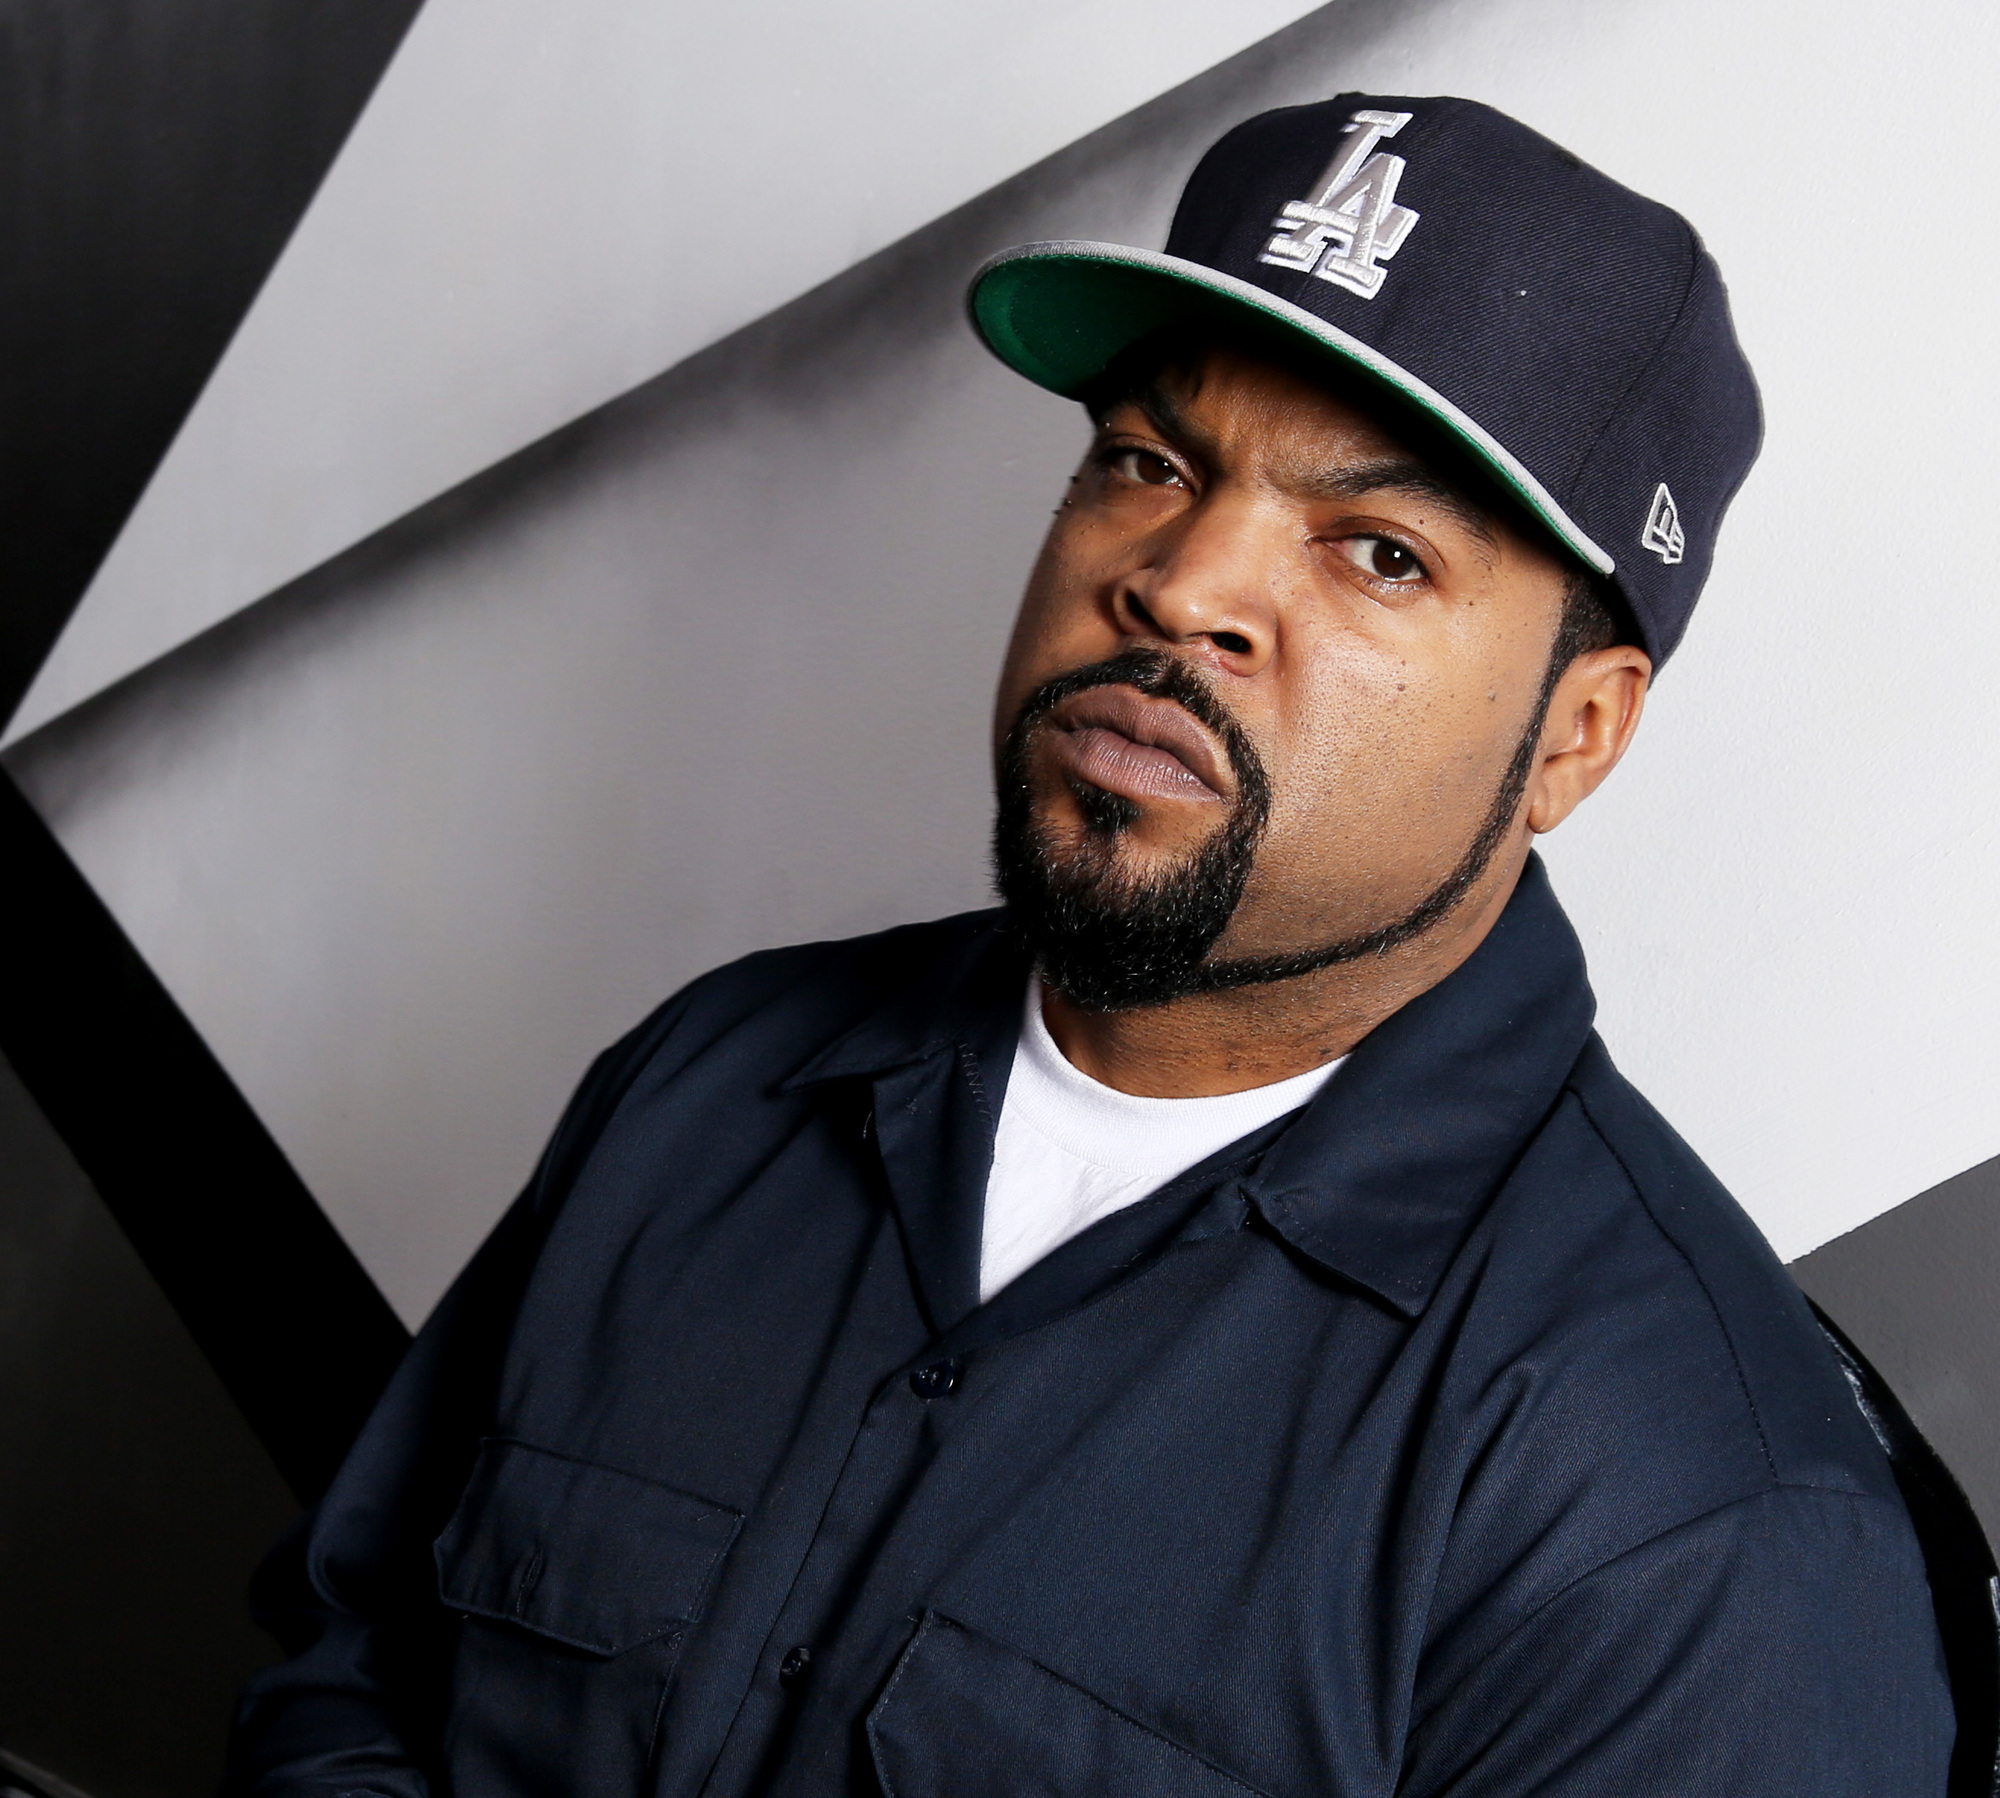 Ice Cube plays Soundset while prepping N.W.A. biopic - StarTribune.com